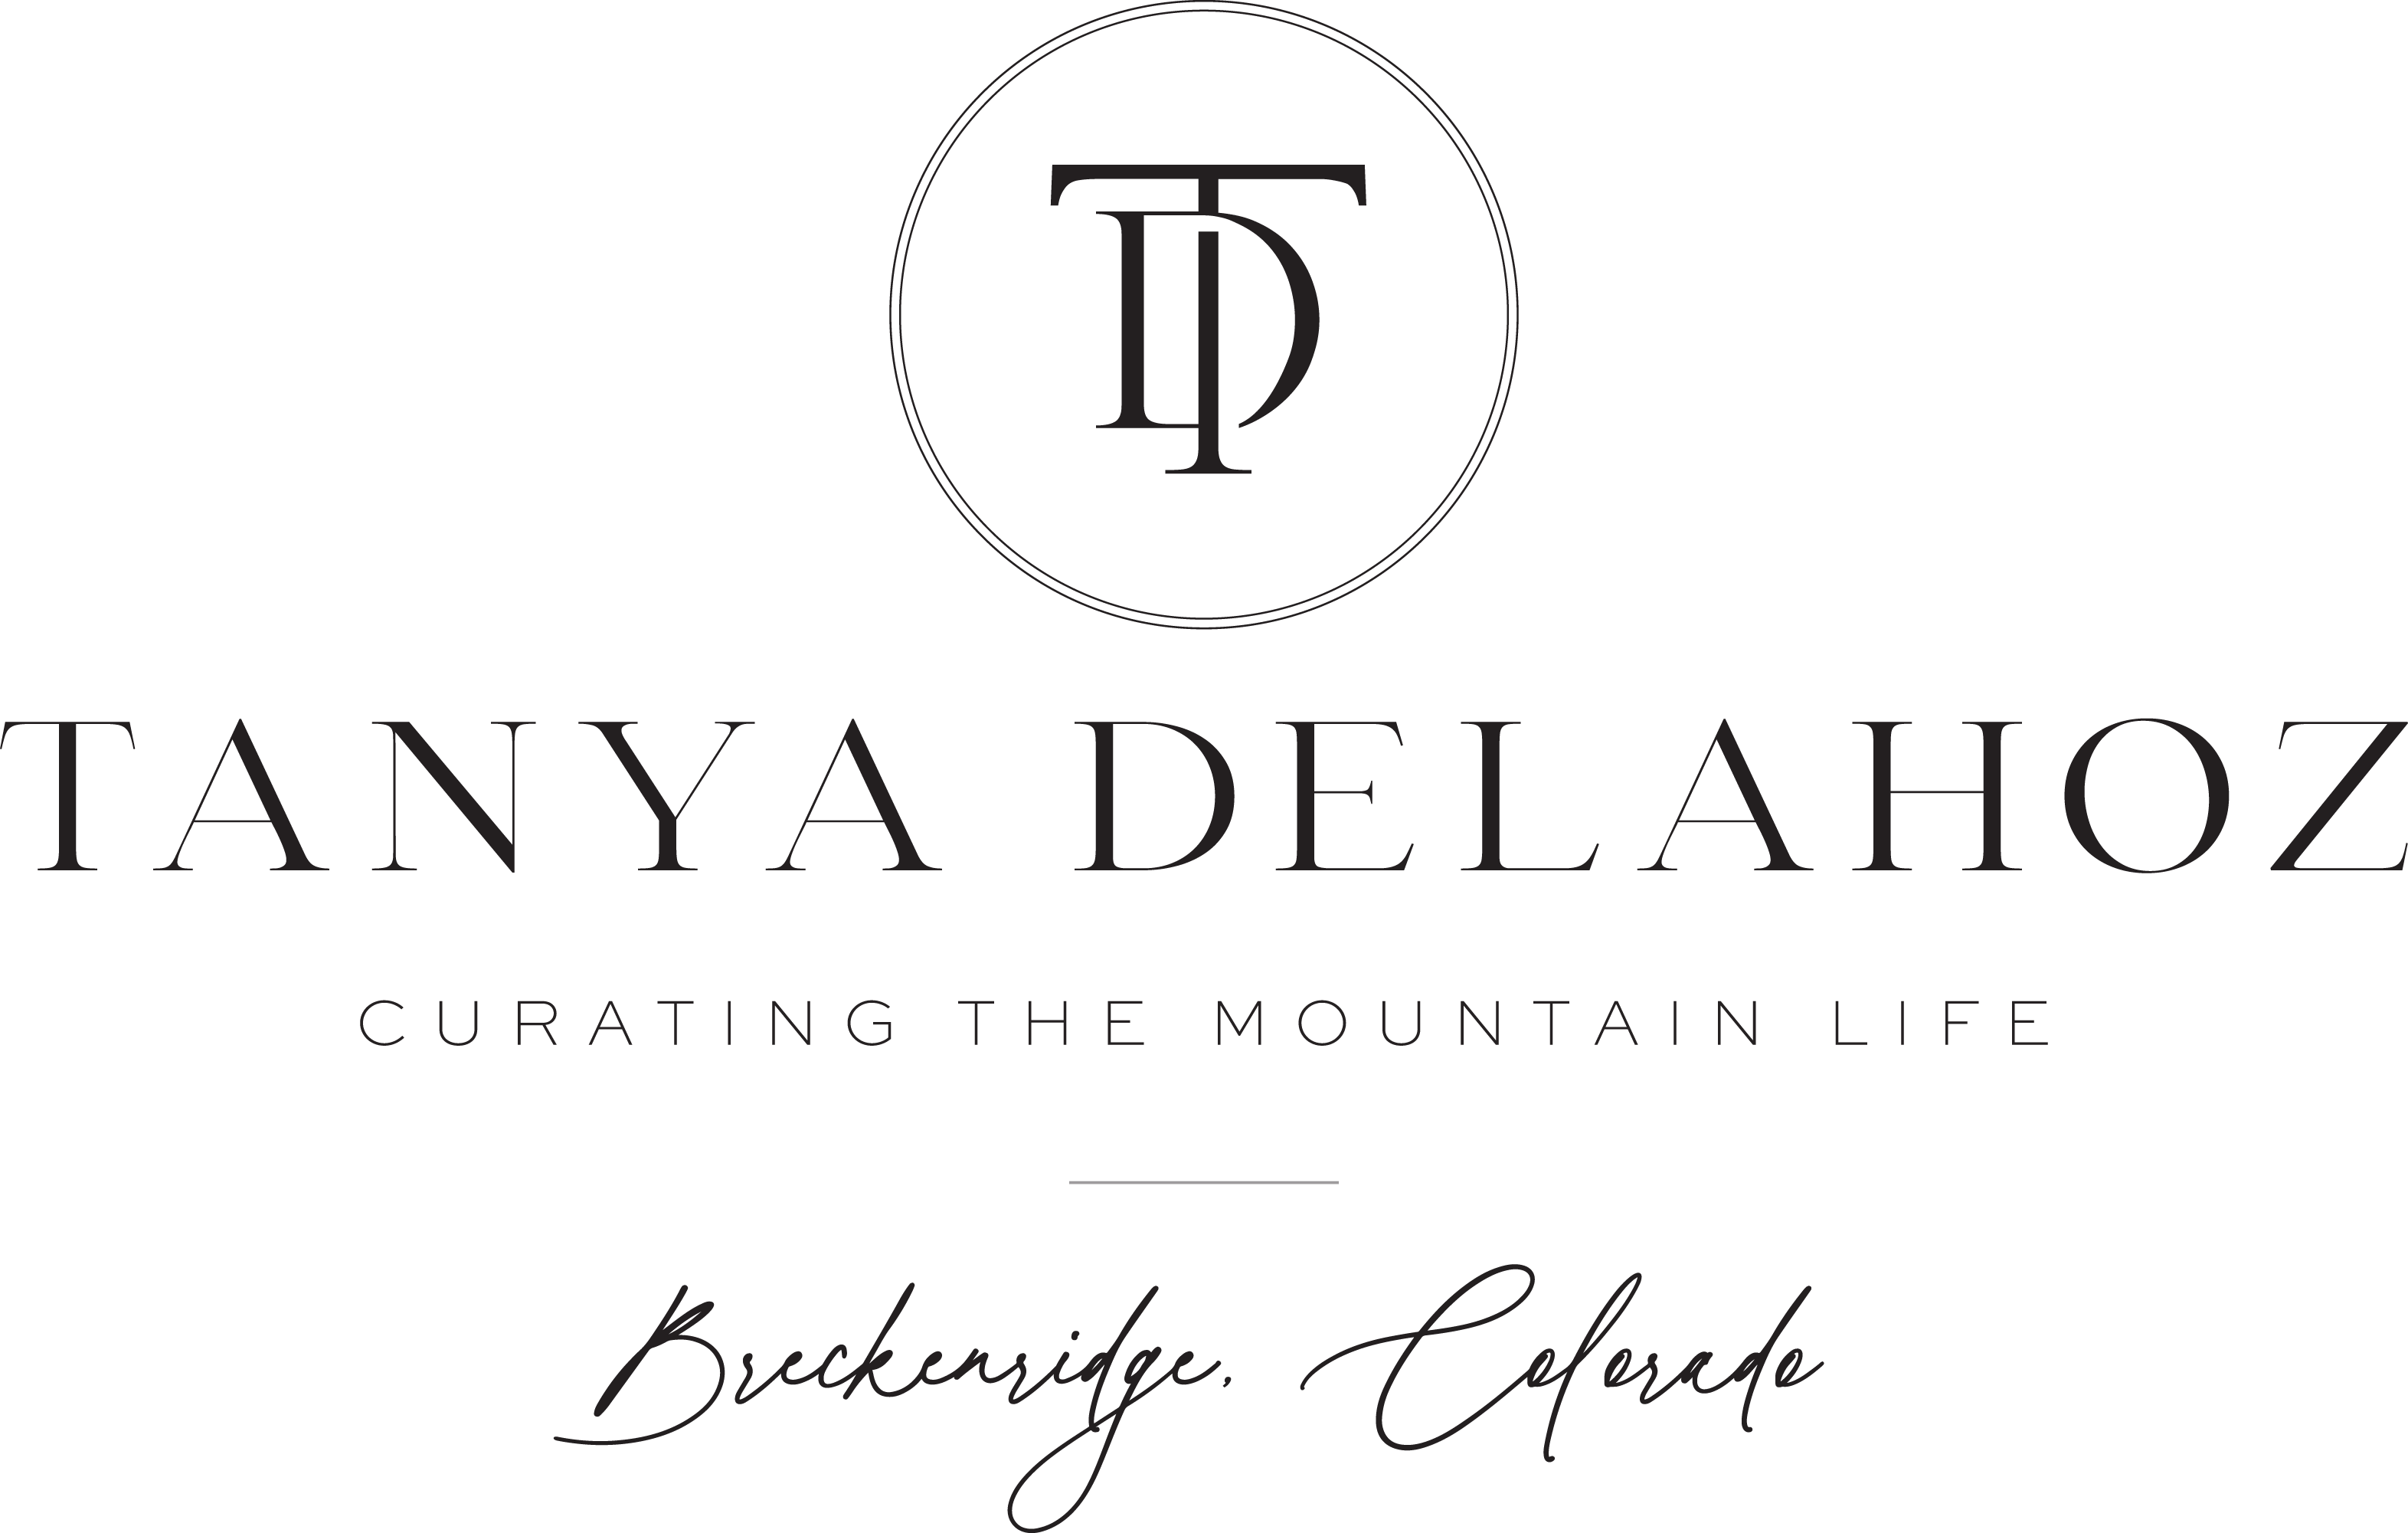 A text banner with the words TANYA DELLAHOZLIFE